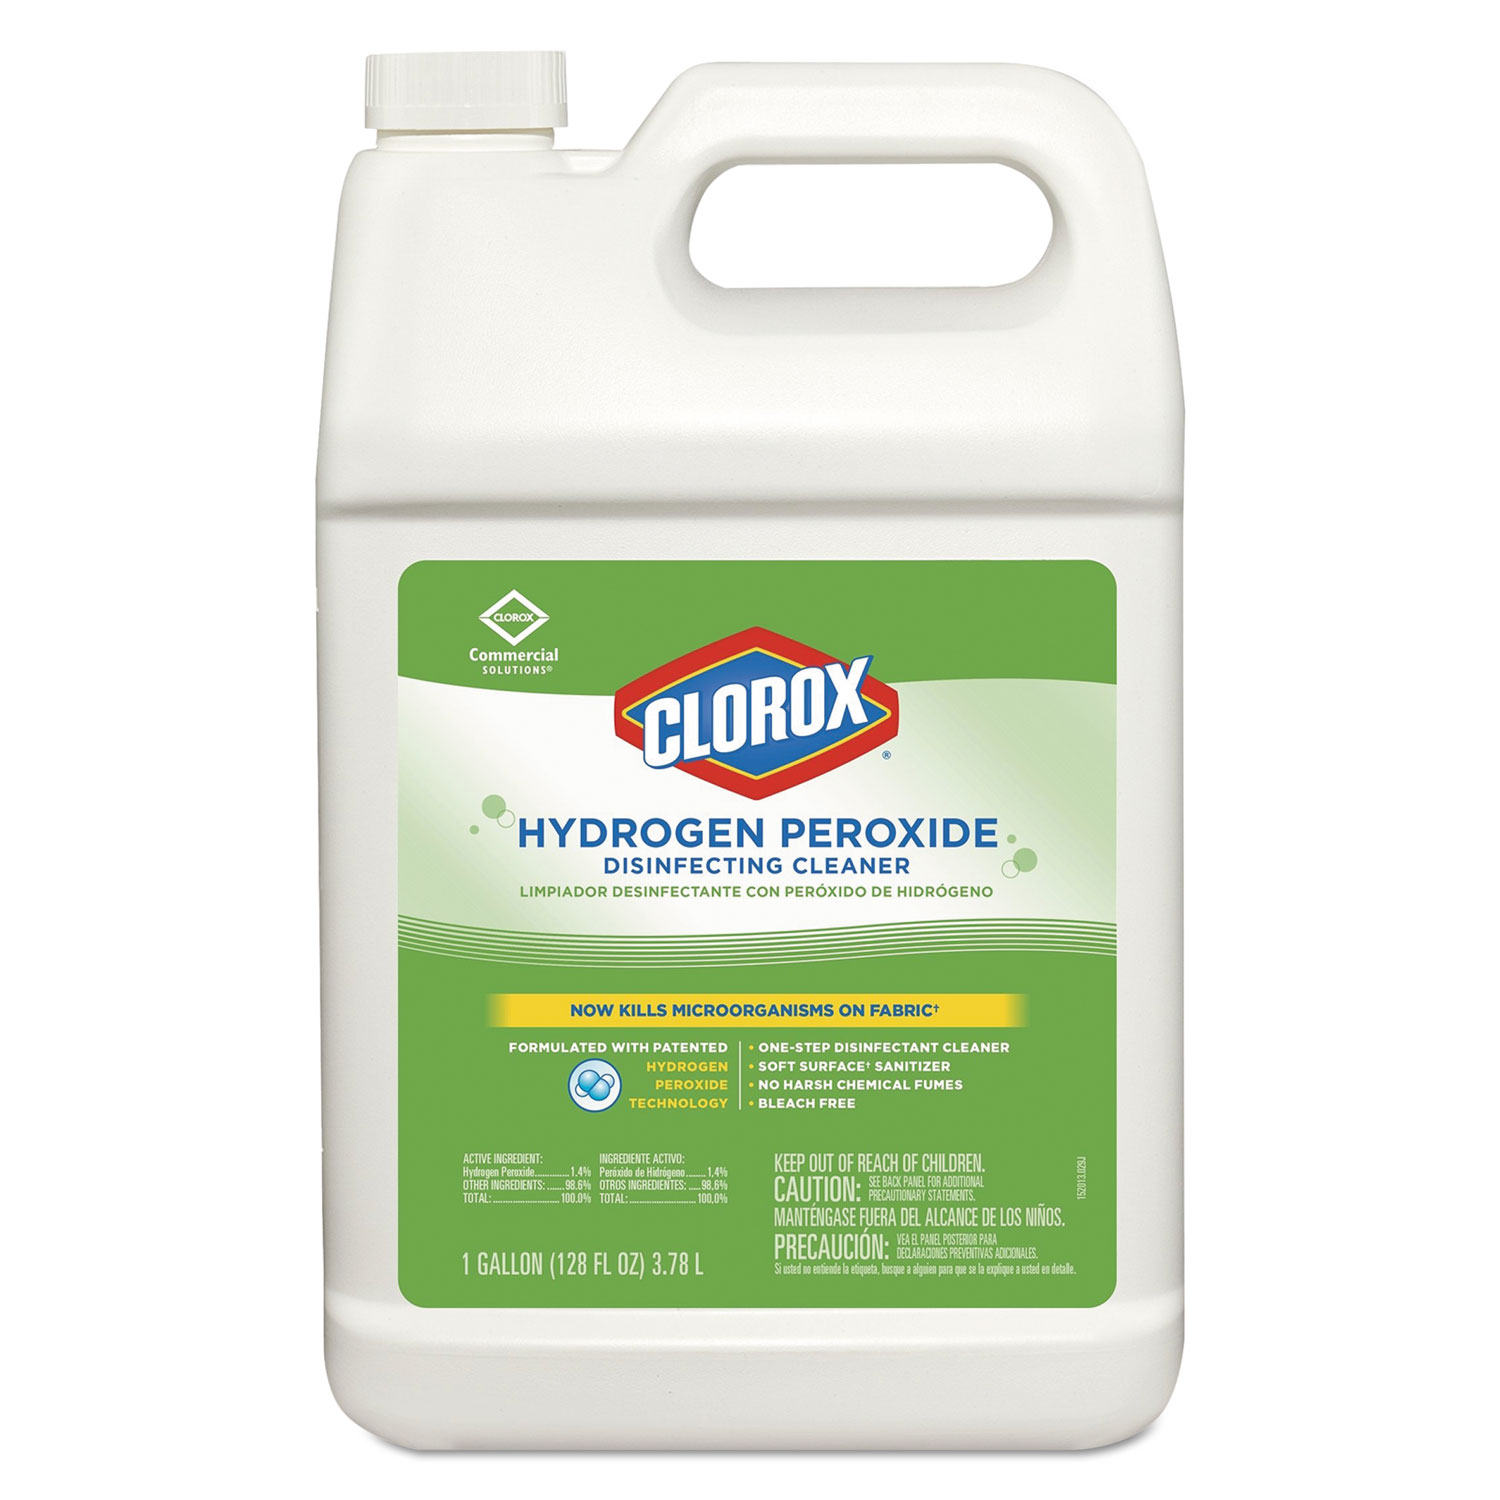  Clorox CLO 30833 Hydrogen Peroxide Disinfecting Cleaner, 1 gal Bottle, 4/Carton (CLO30833) 